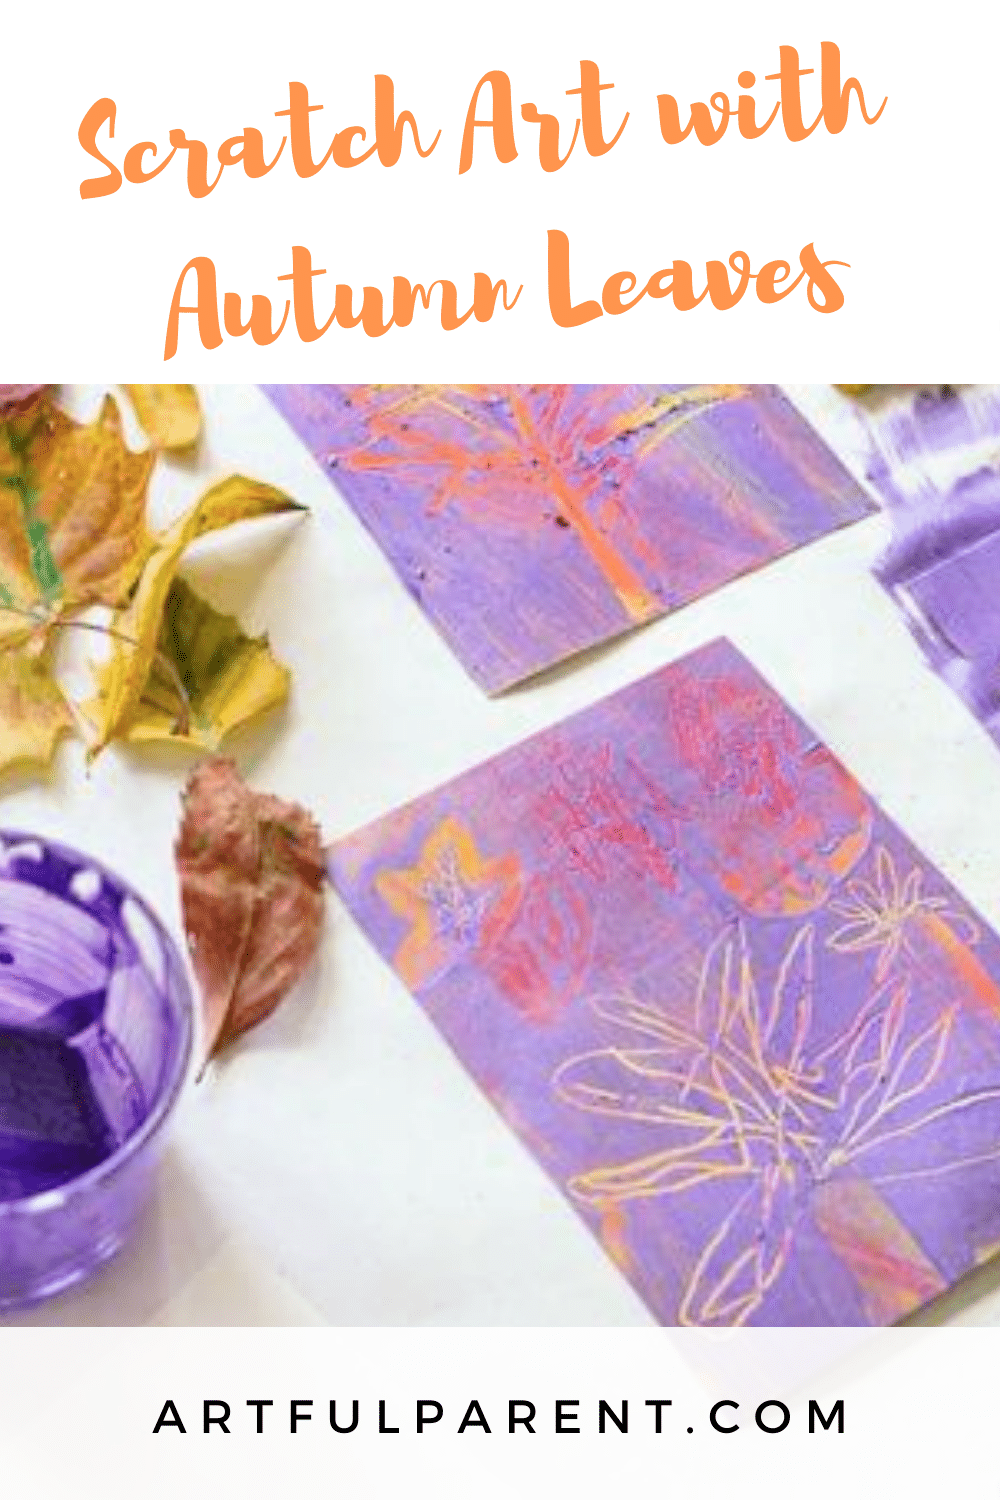 How to Make Scratch Art with Autumn Leaves